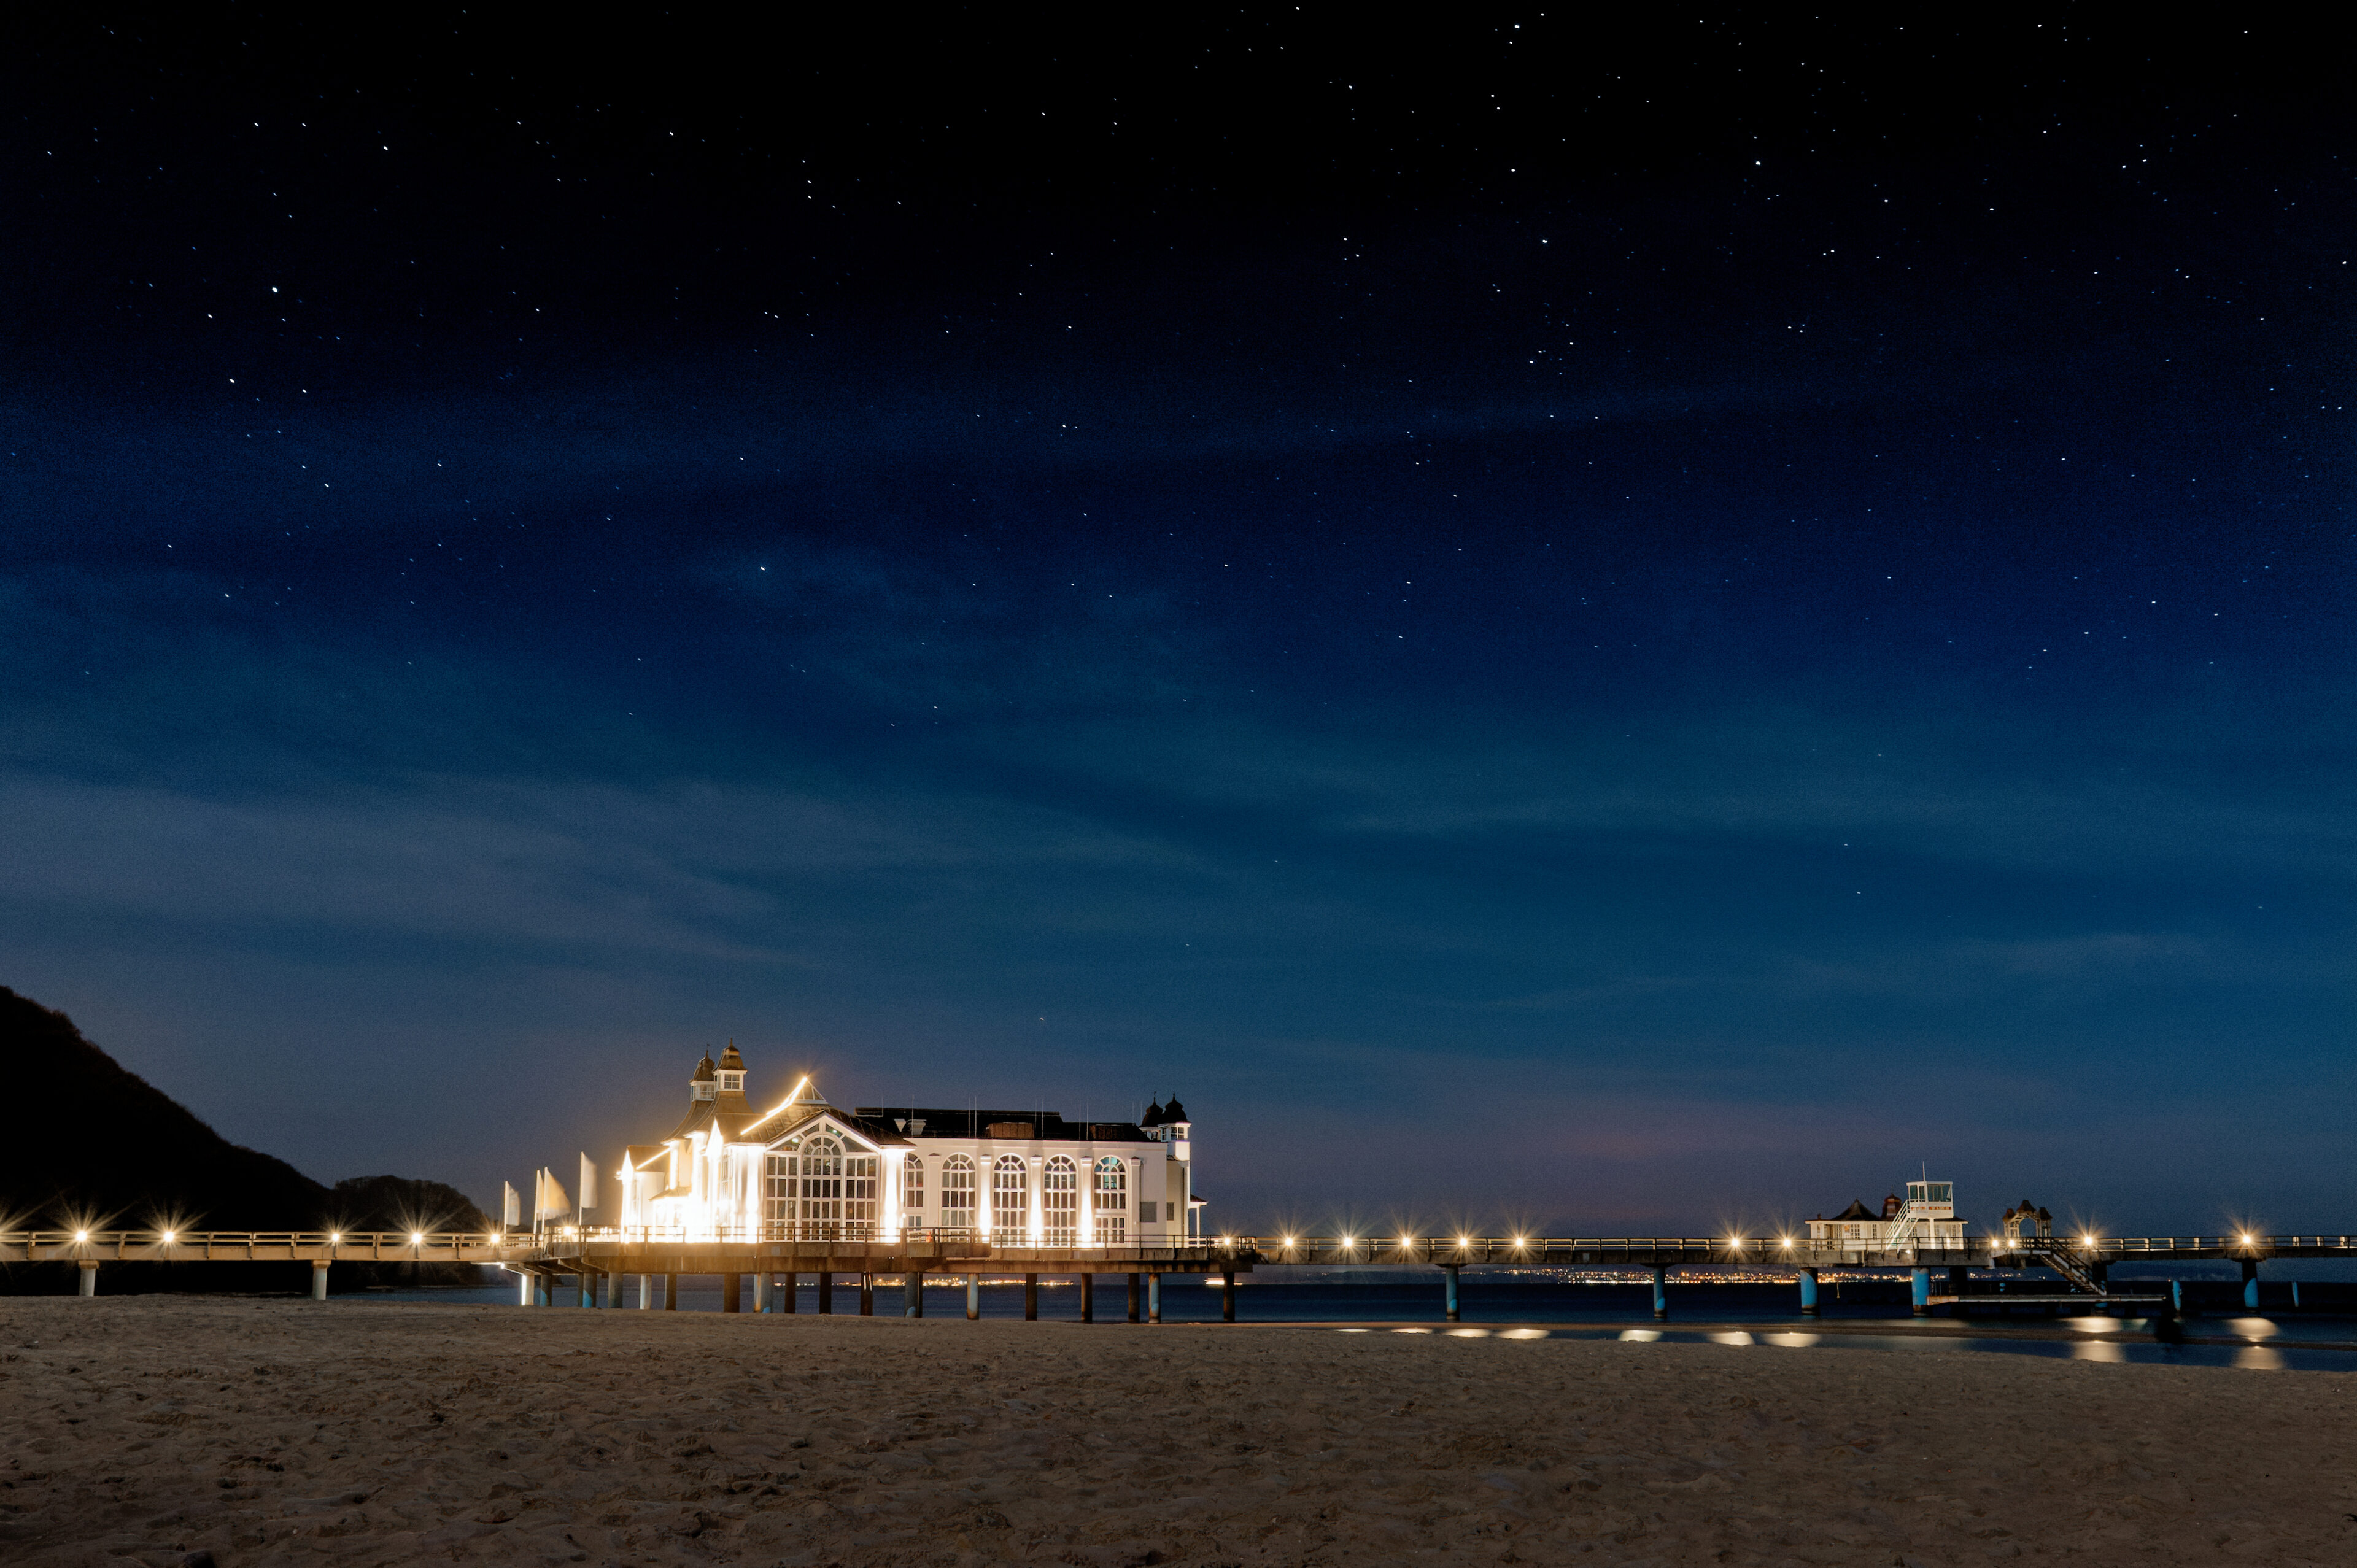 Baltic resort Sellin pier at night with starry sky